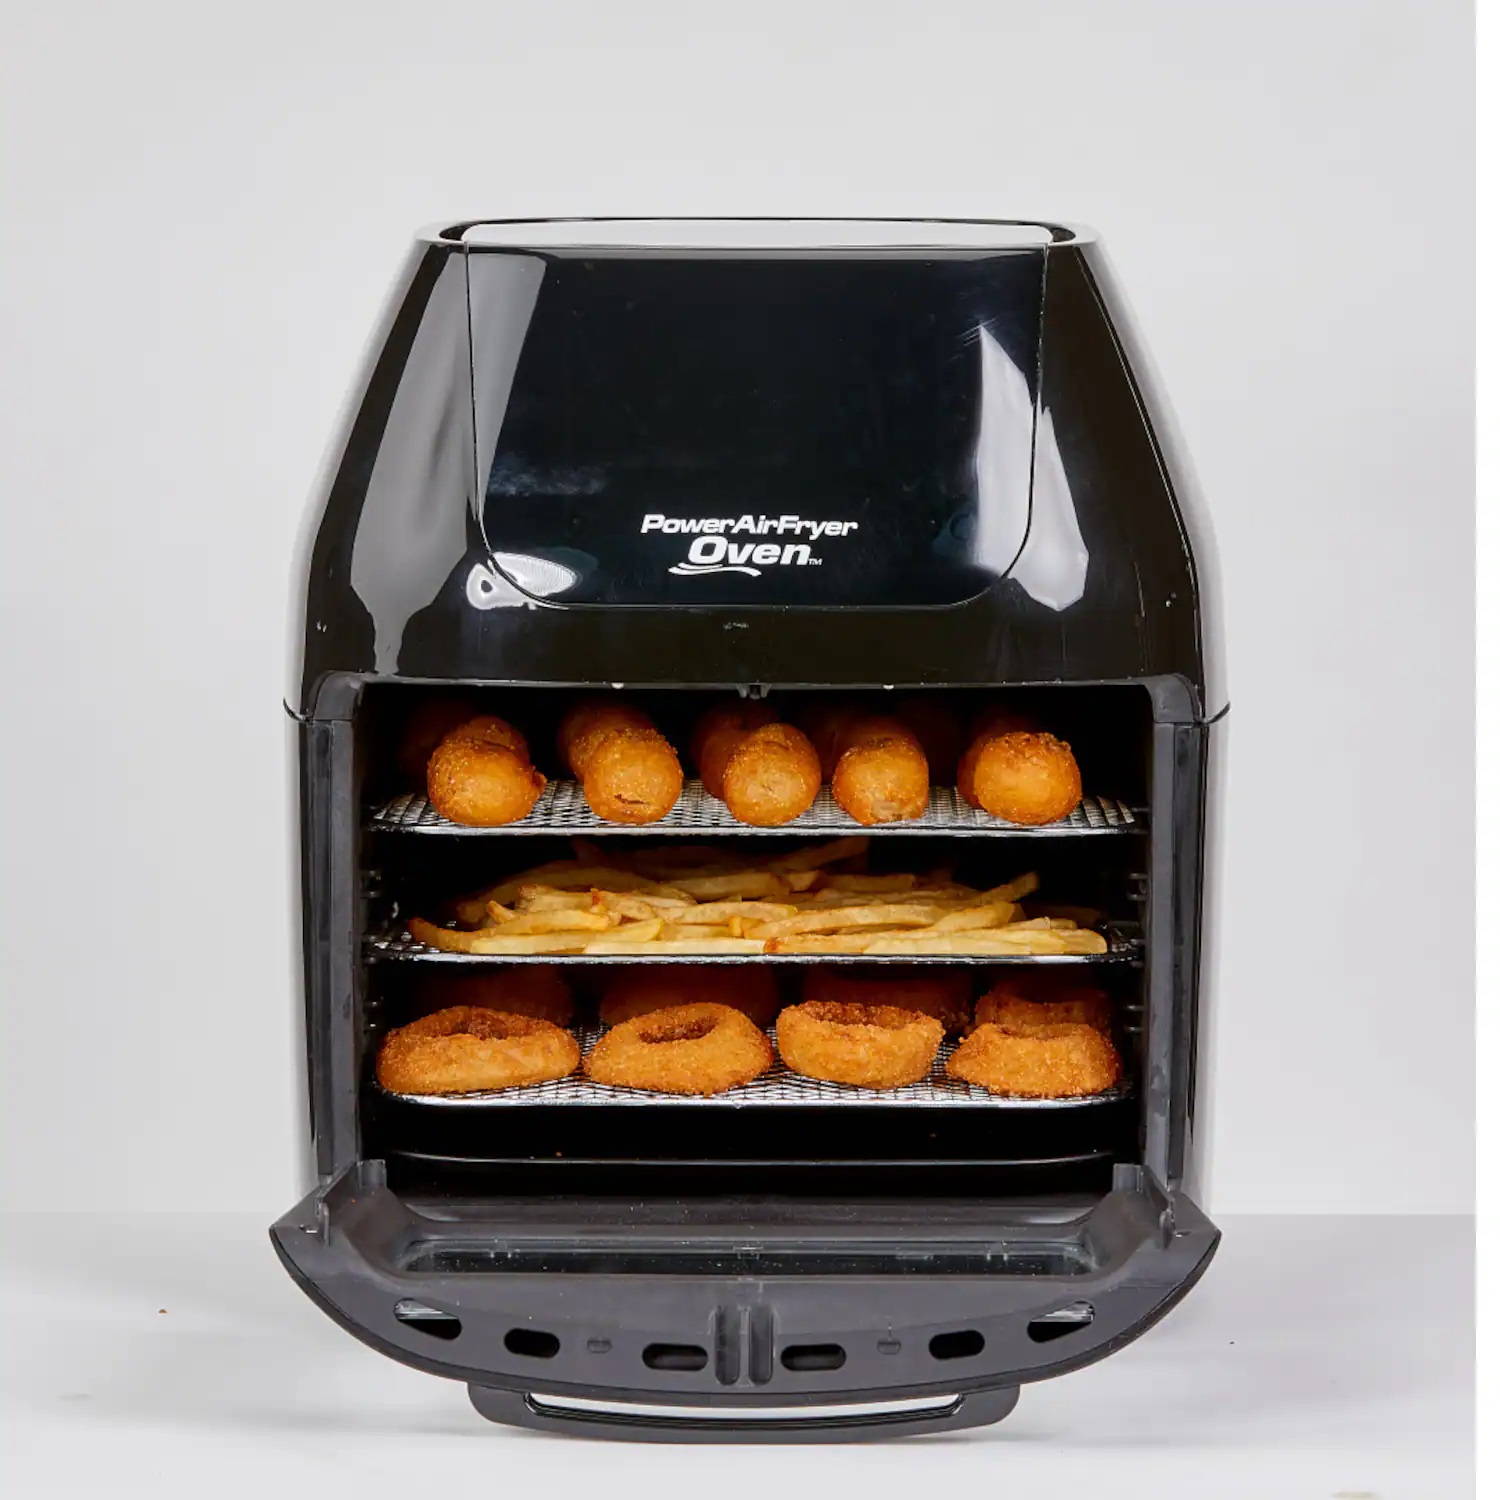 11 Best Air Fryer Oven As Seen On Tv for 2023